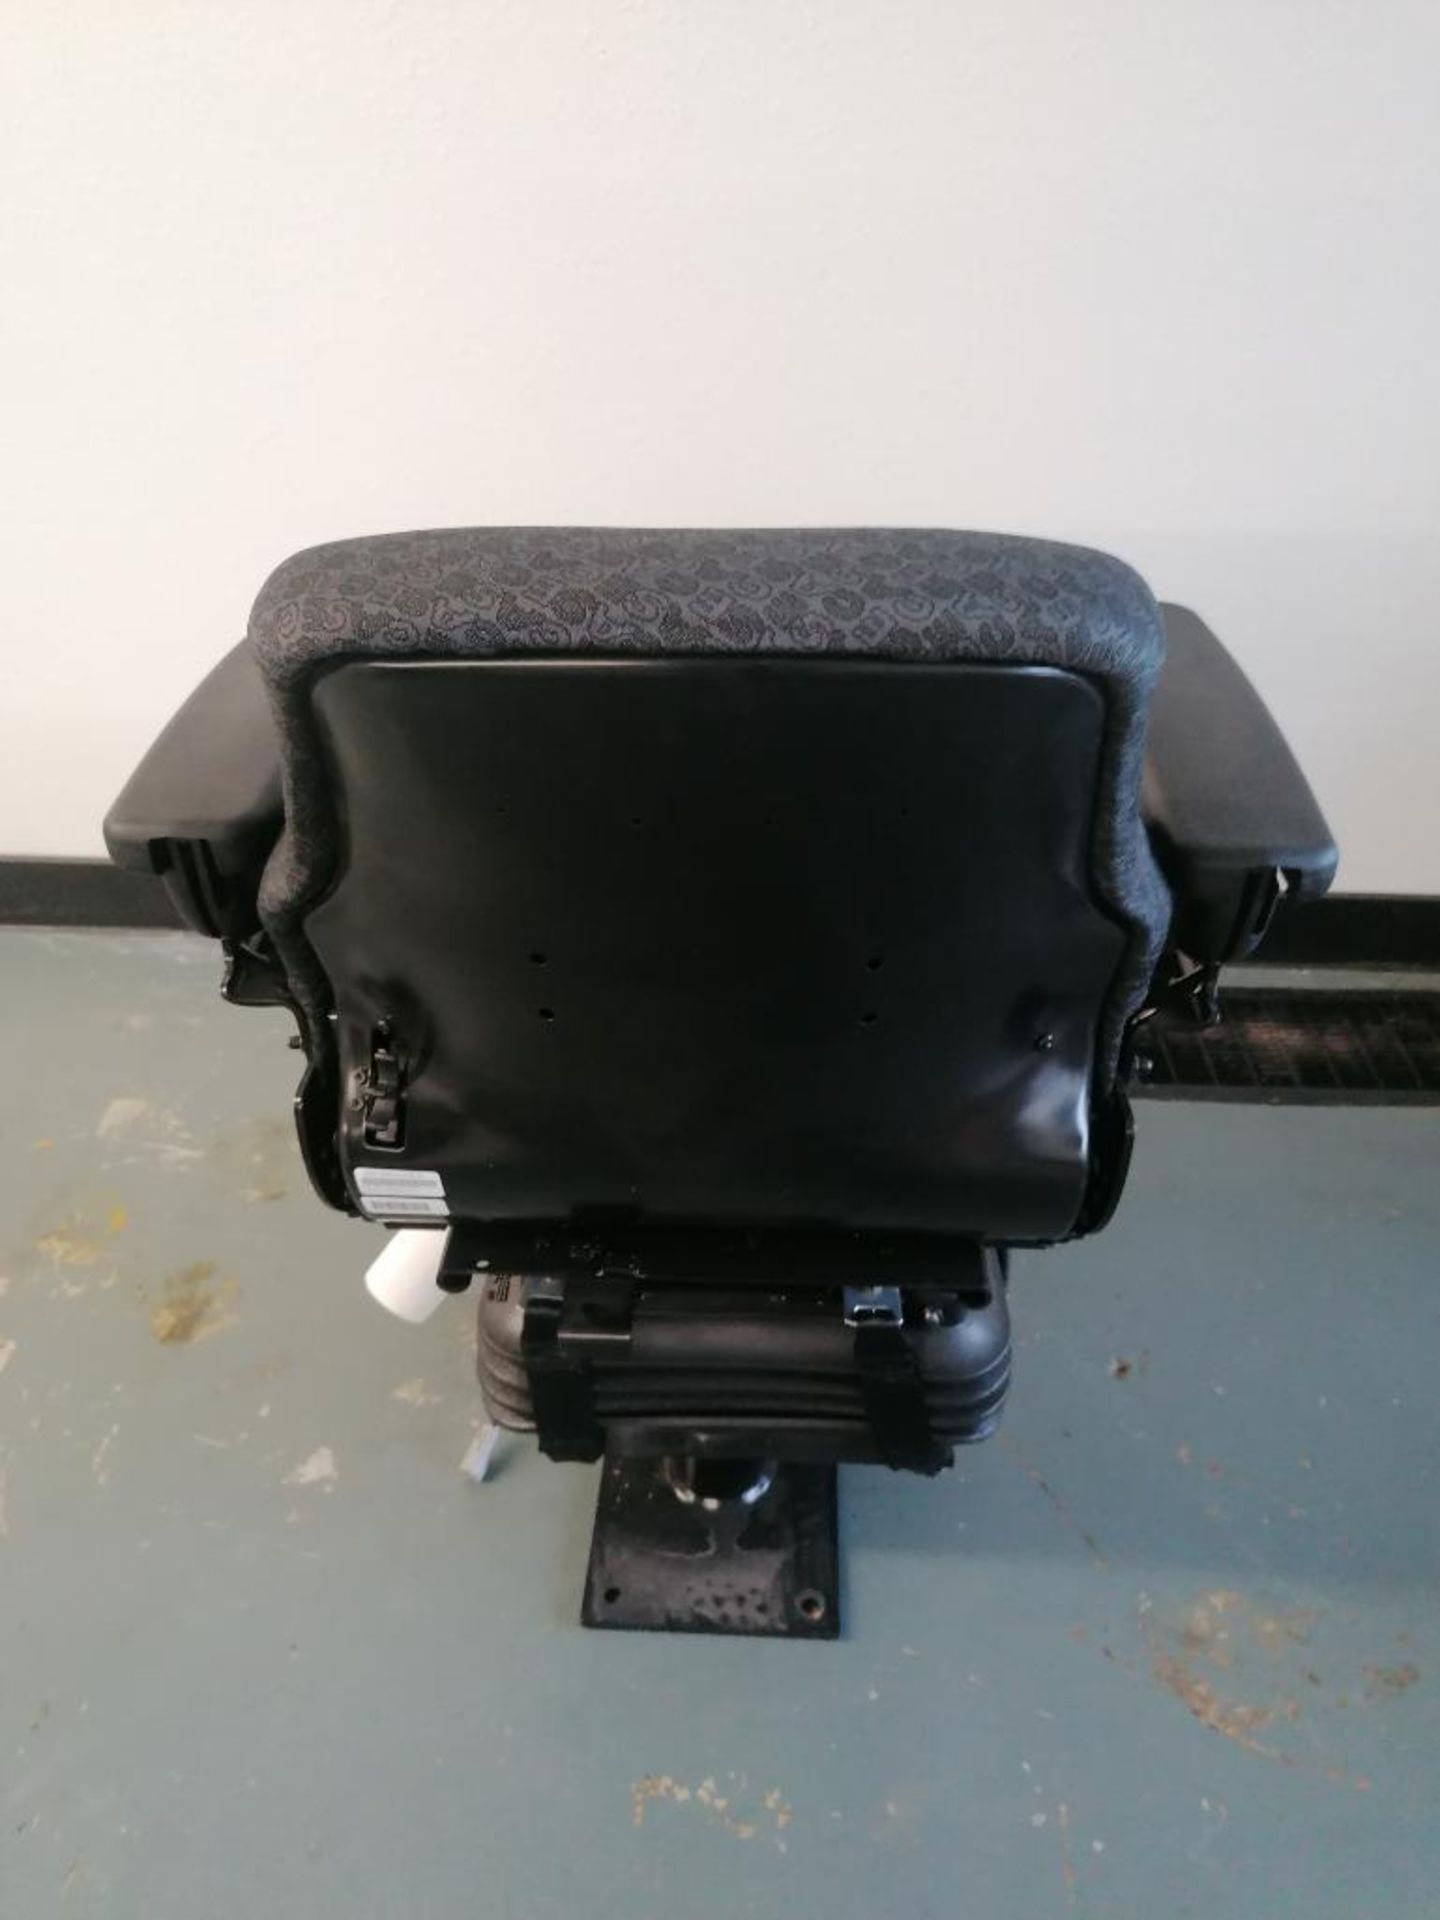 CNH Air Suspension Seat for Case Backhoe, Serial #007091742359. Located in Mt. Pleasant, IA. - Image 3 of 10